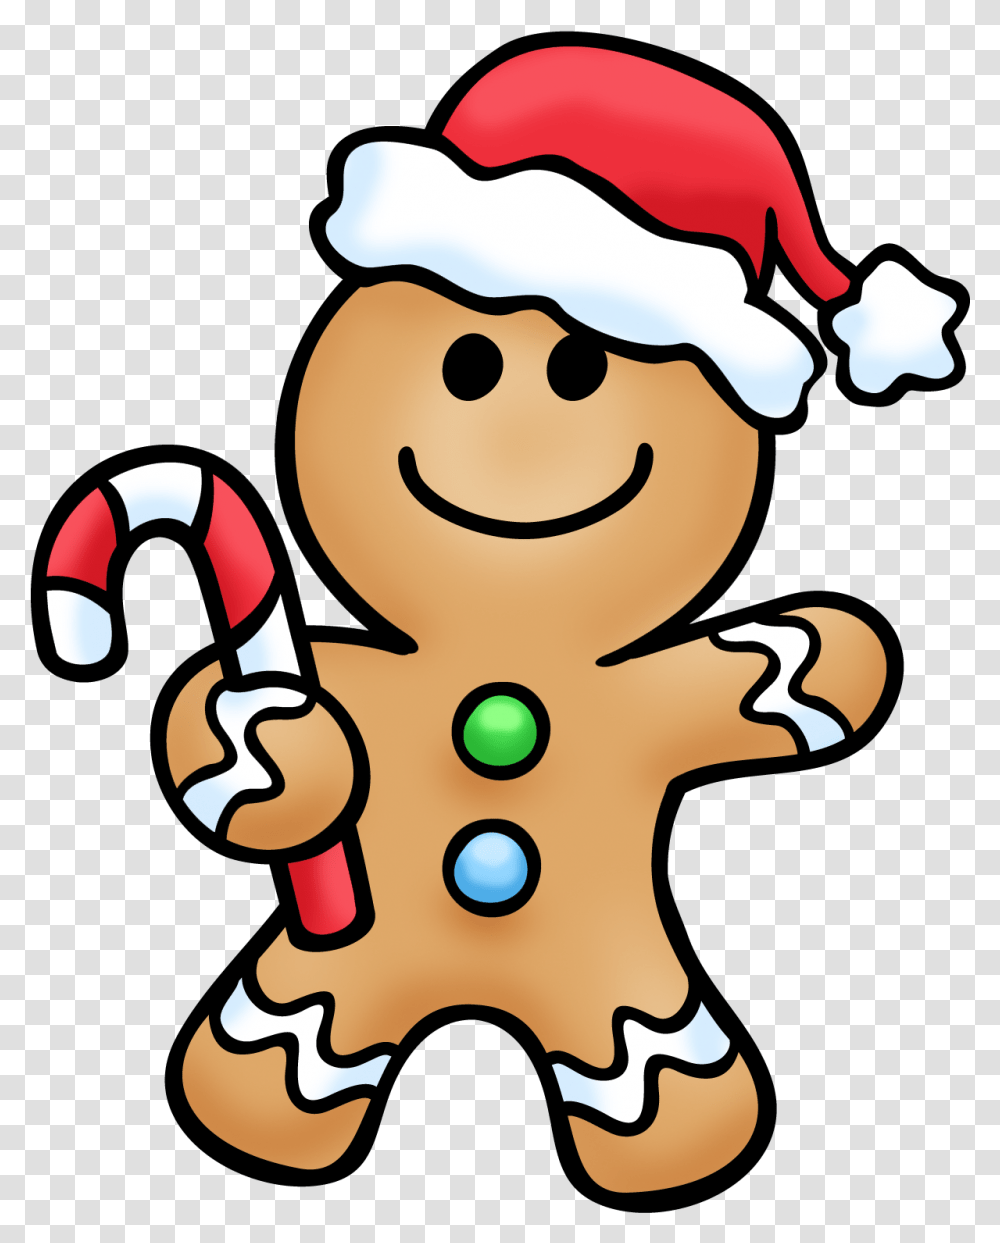 Gingerbread Man Clip Art Images Illustrations Photos Ginger Bread Man Coloring Pages, Cookie, Food, Biscuit, Sweets Transparent Png